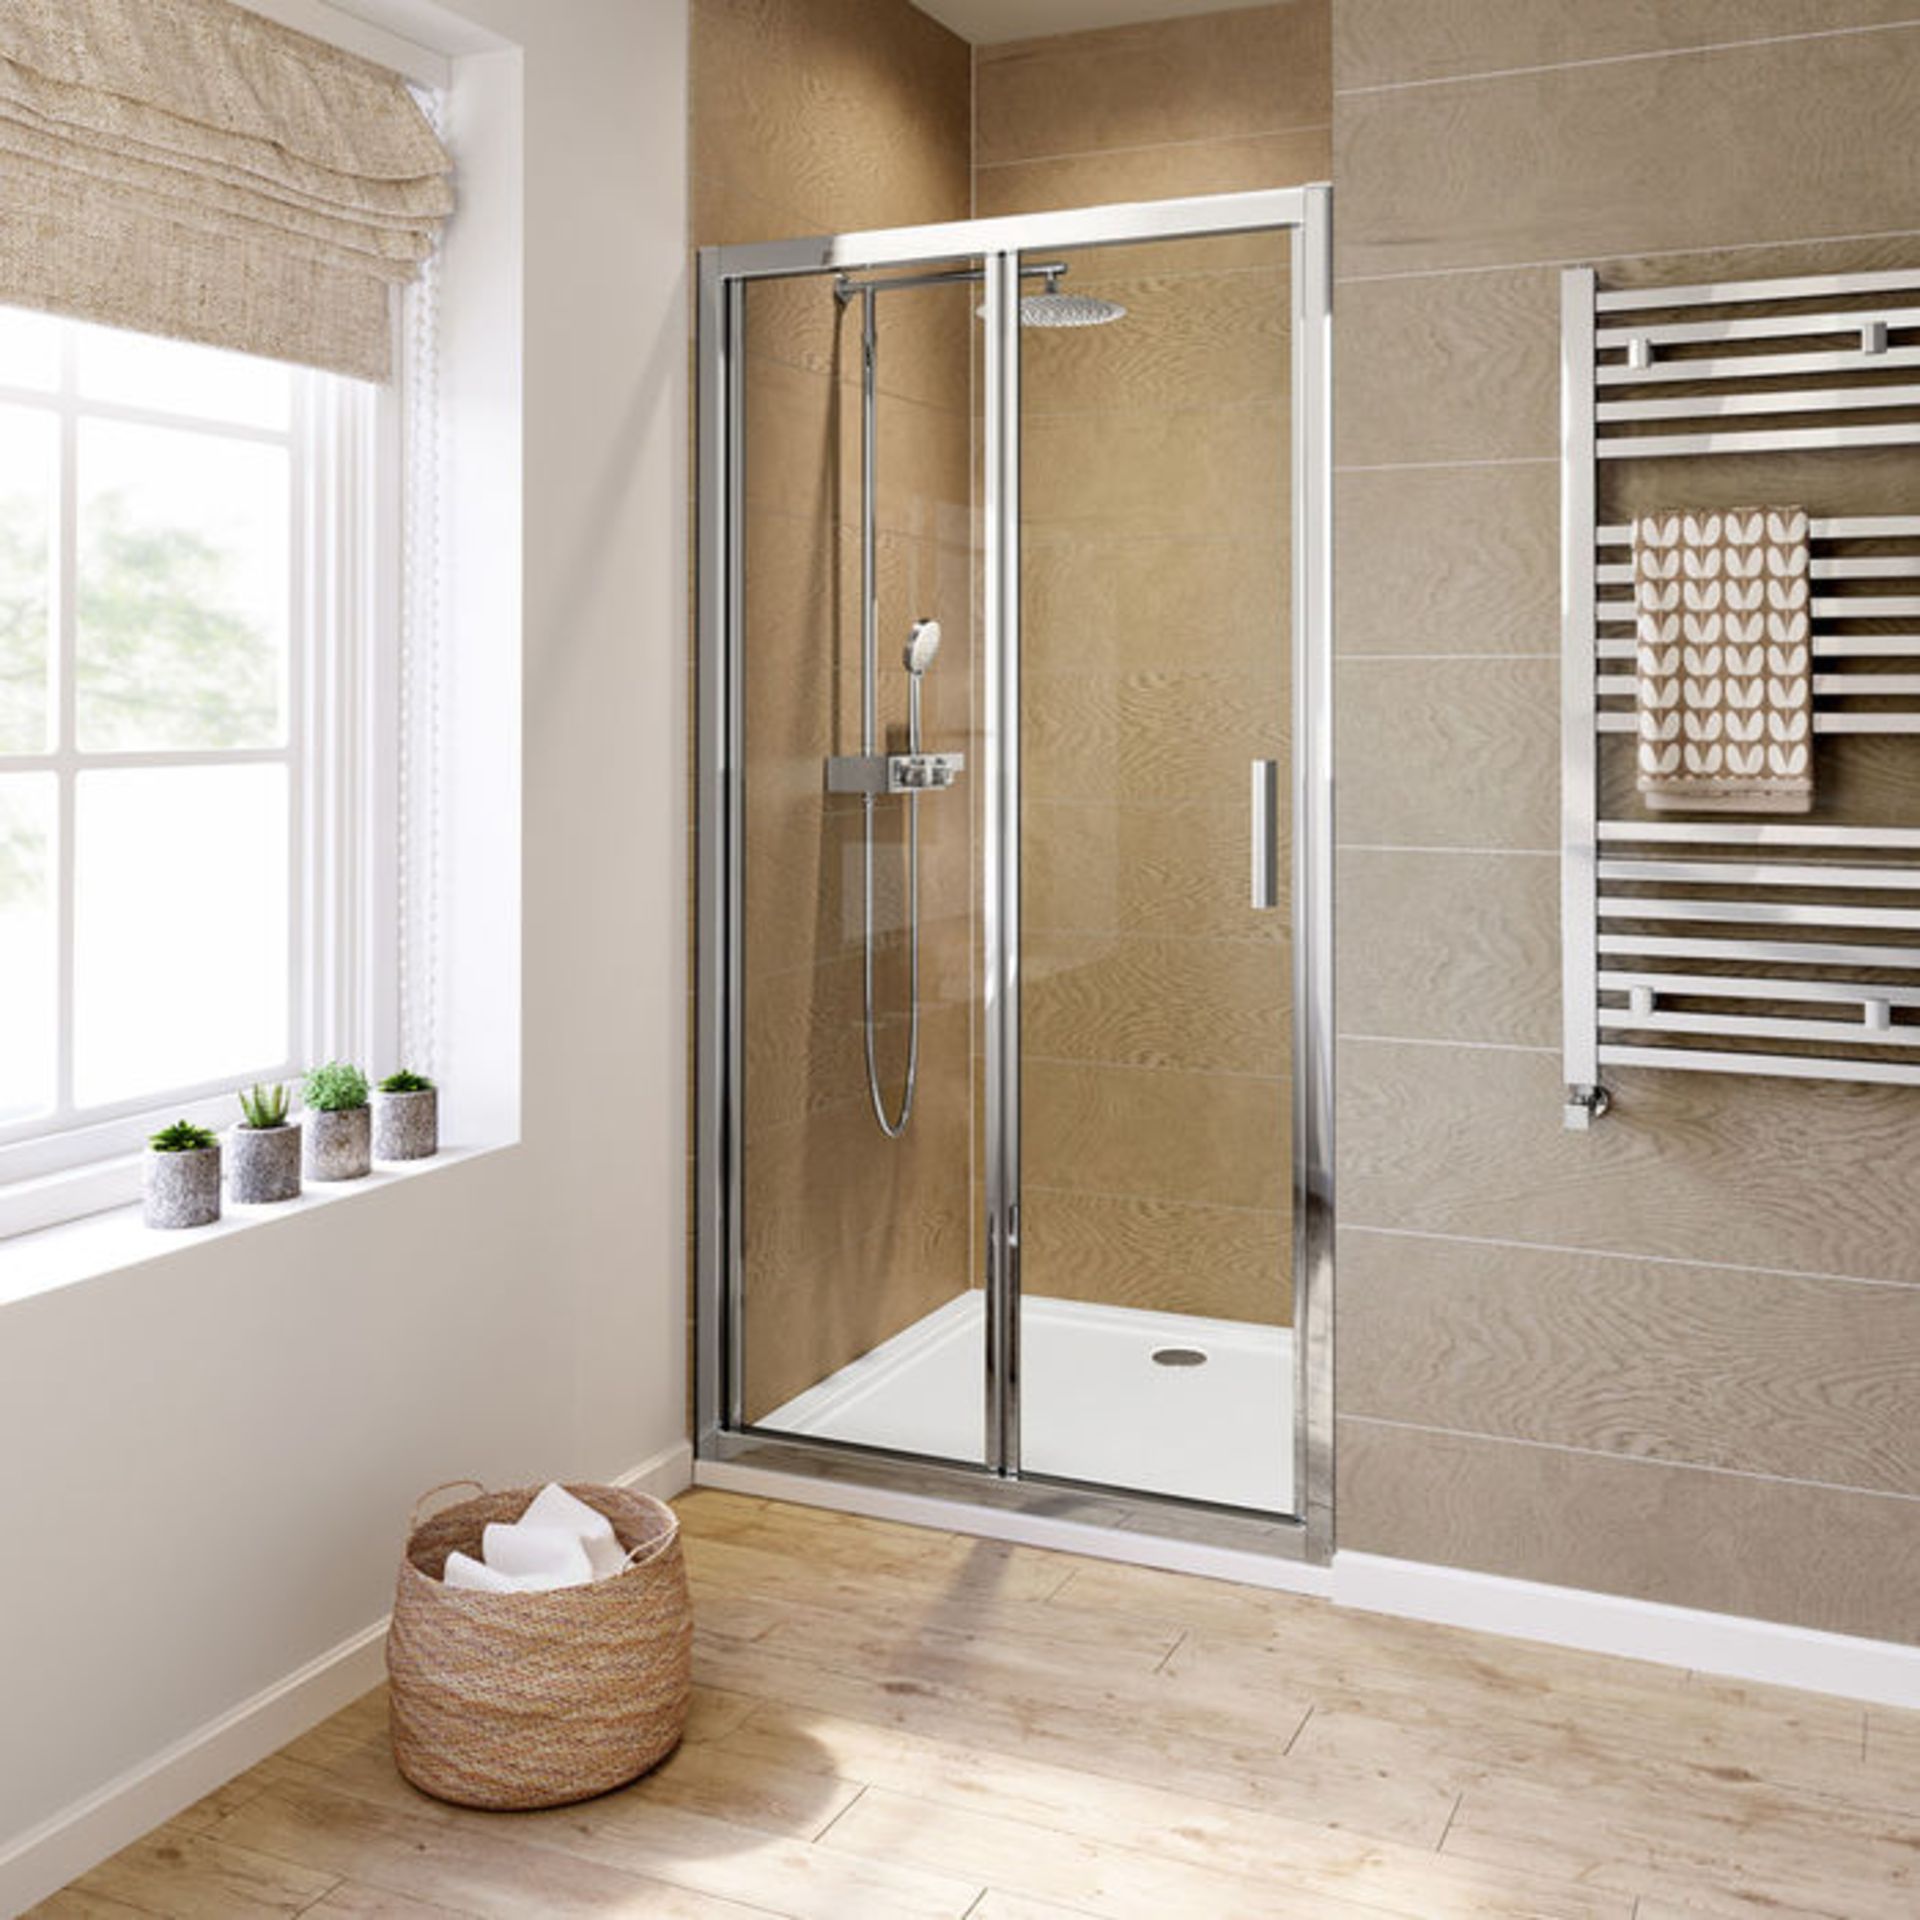 (ZA215) 1000mm - 6mm - Elements EasyClean Bifold Shower Door. RRP £239.99. 6mm Safety Glass - - Image 4 of 5